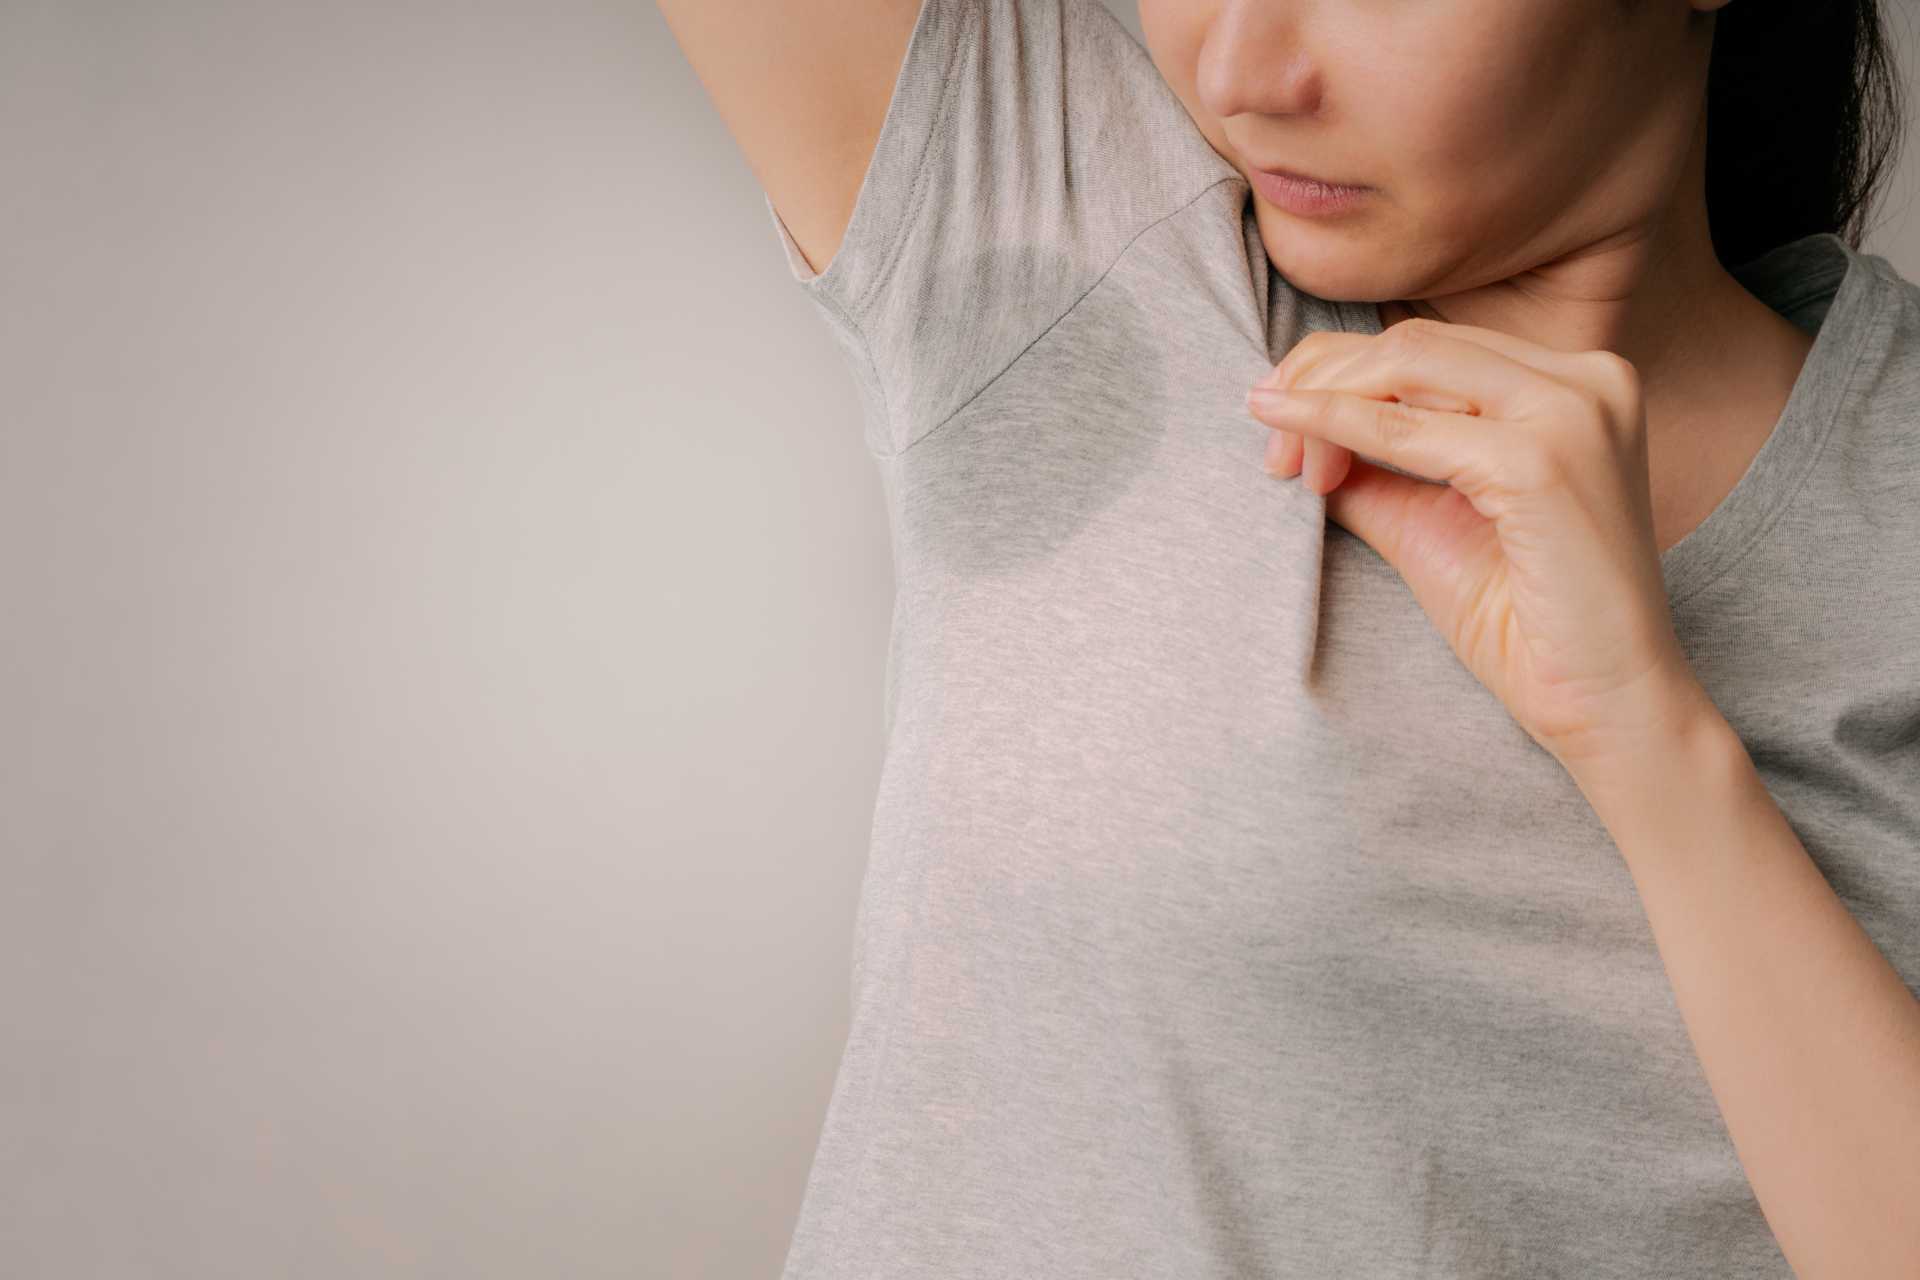 Effective Ways to Treat Excessive Sweating